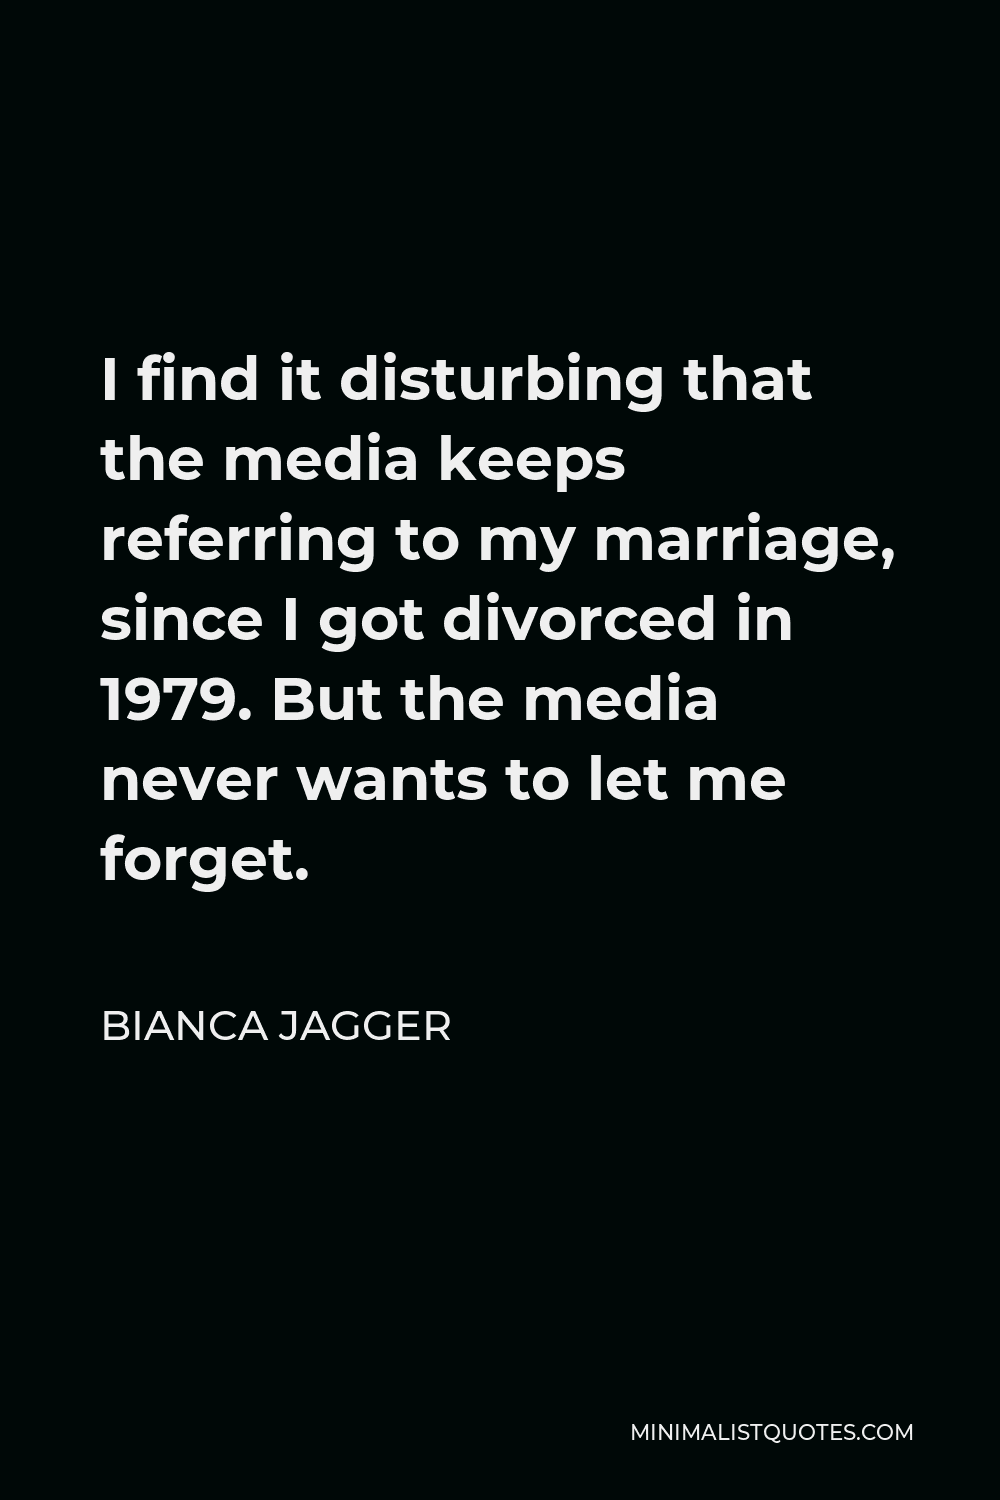 Bianca Jagger Quote - I find it disturbing that the media keeps referring to my marriage, since I got divorced in 1979. But the media never wants to let me forget.